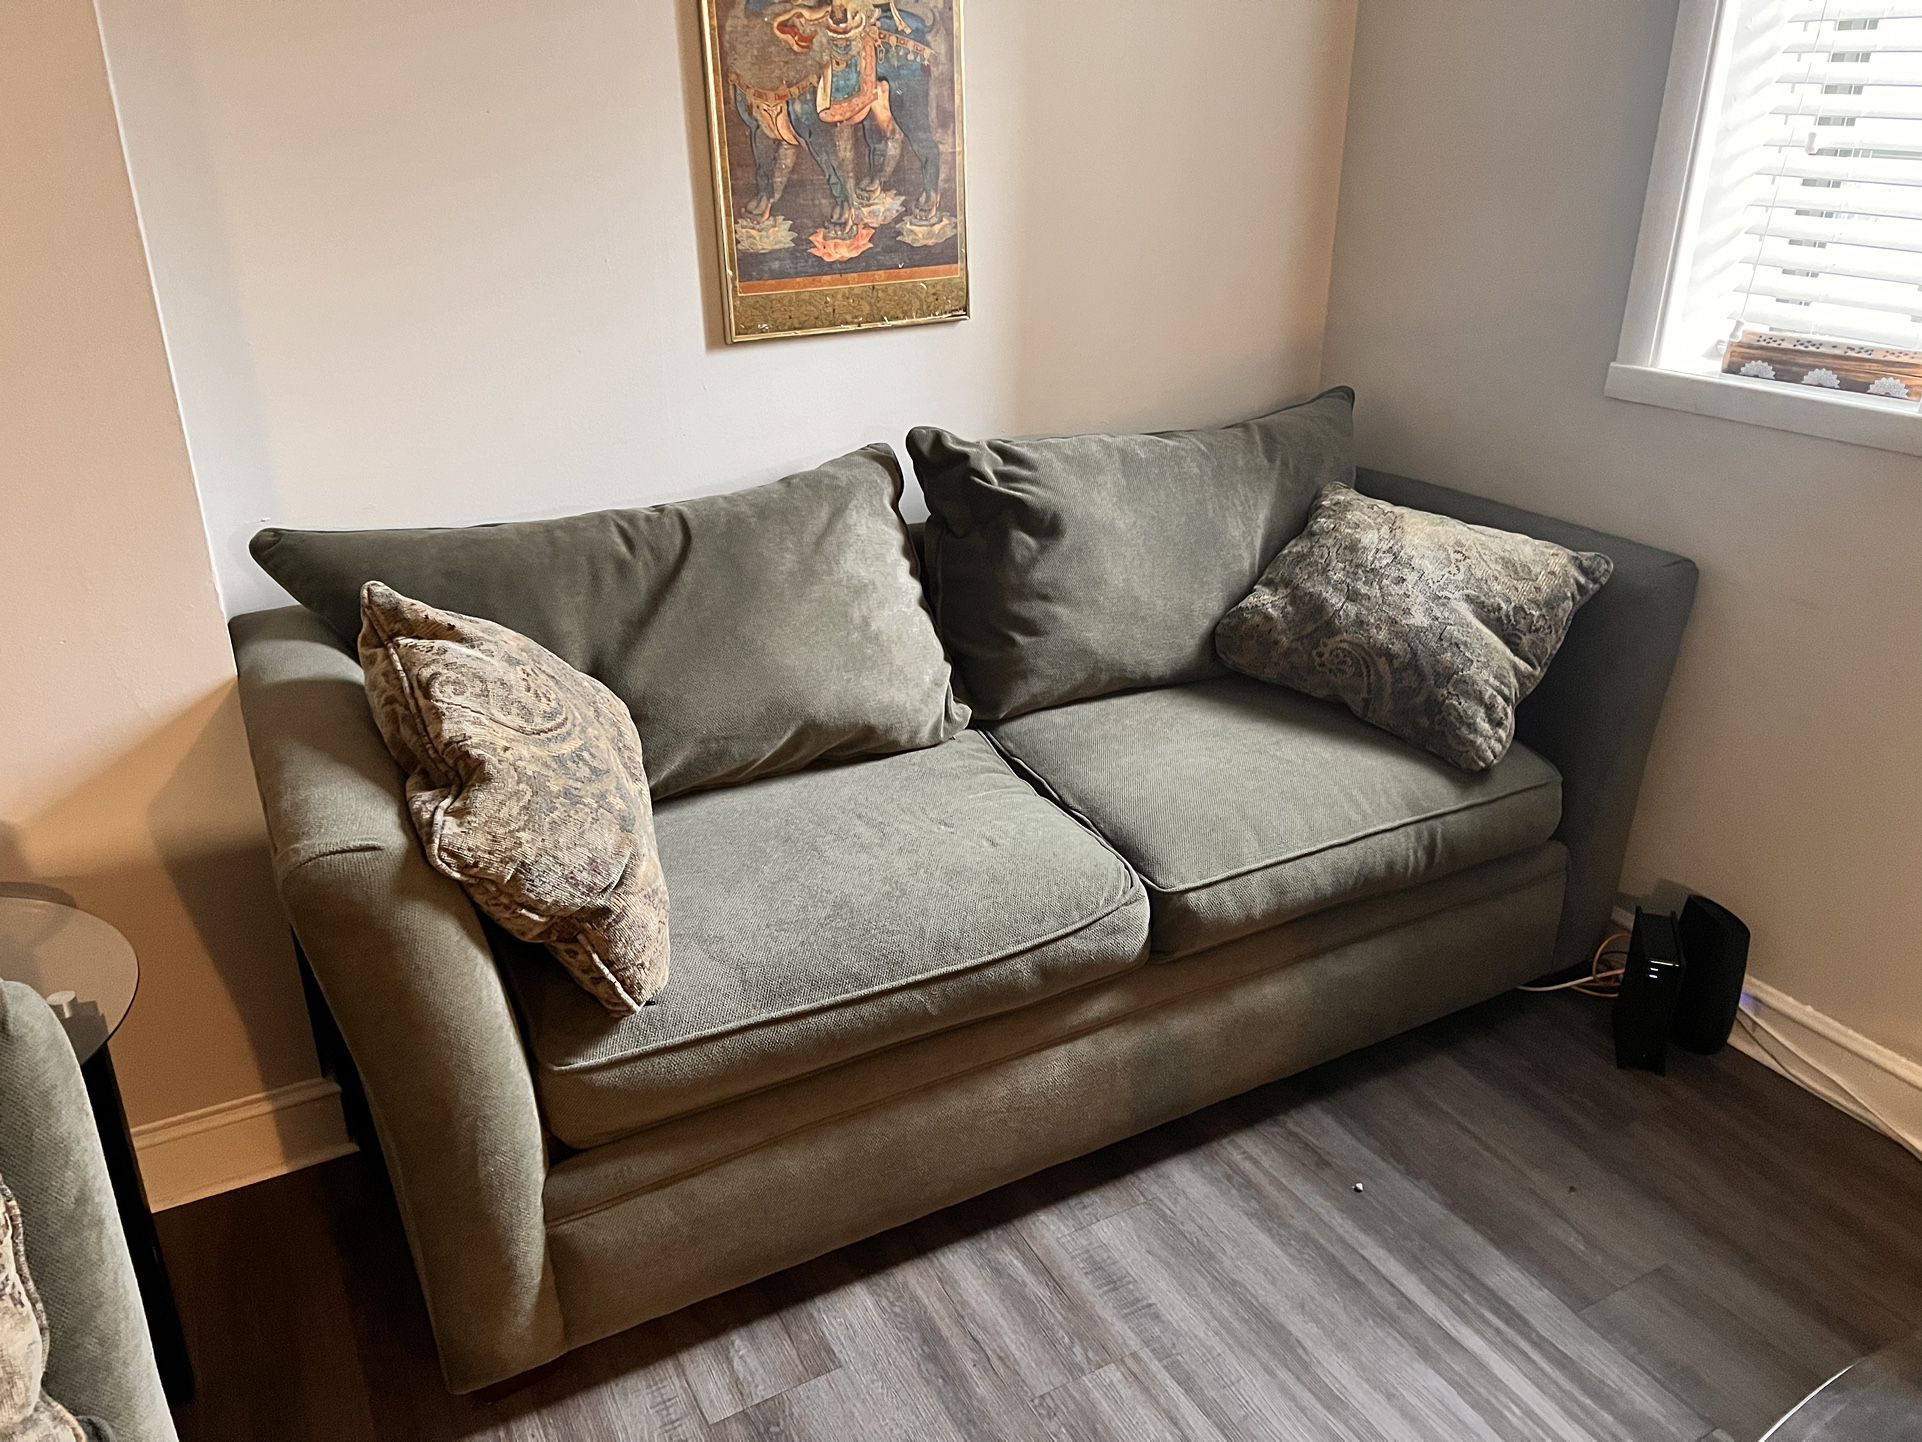 Couch Love Seat And Recliner (Lazy Boy)